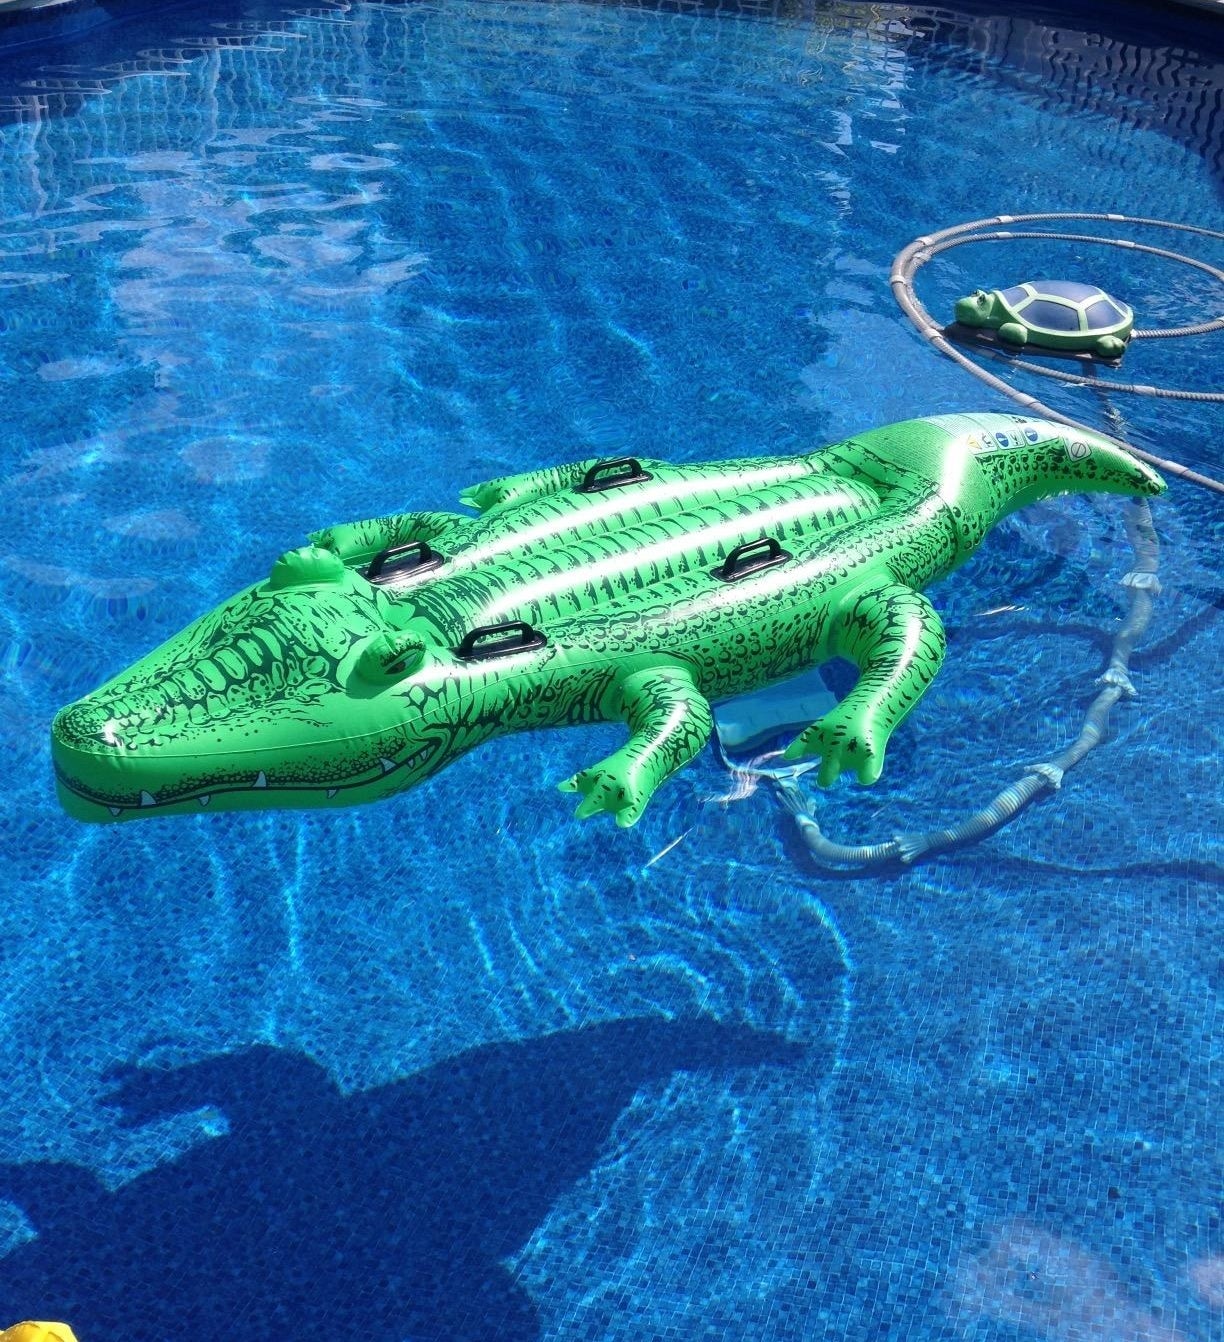 A green alligator pool float with black handles